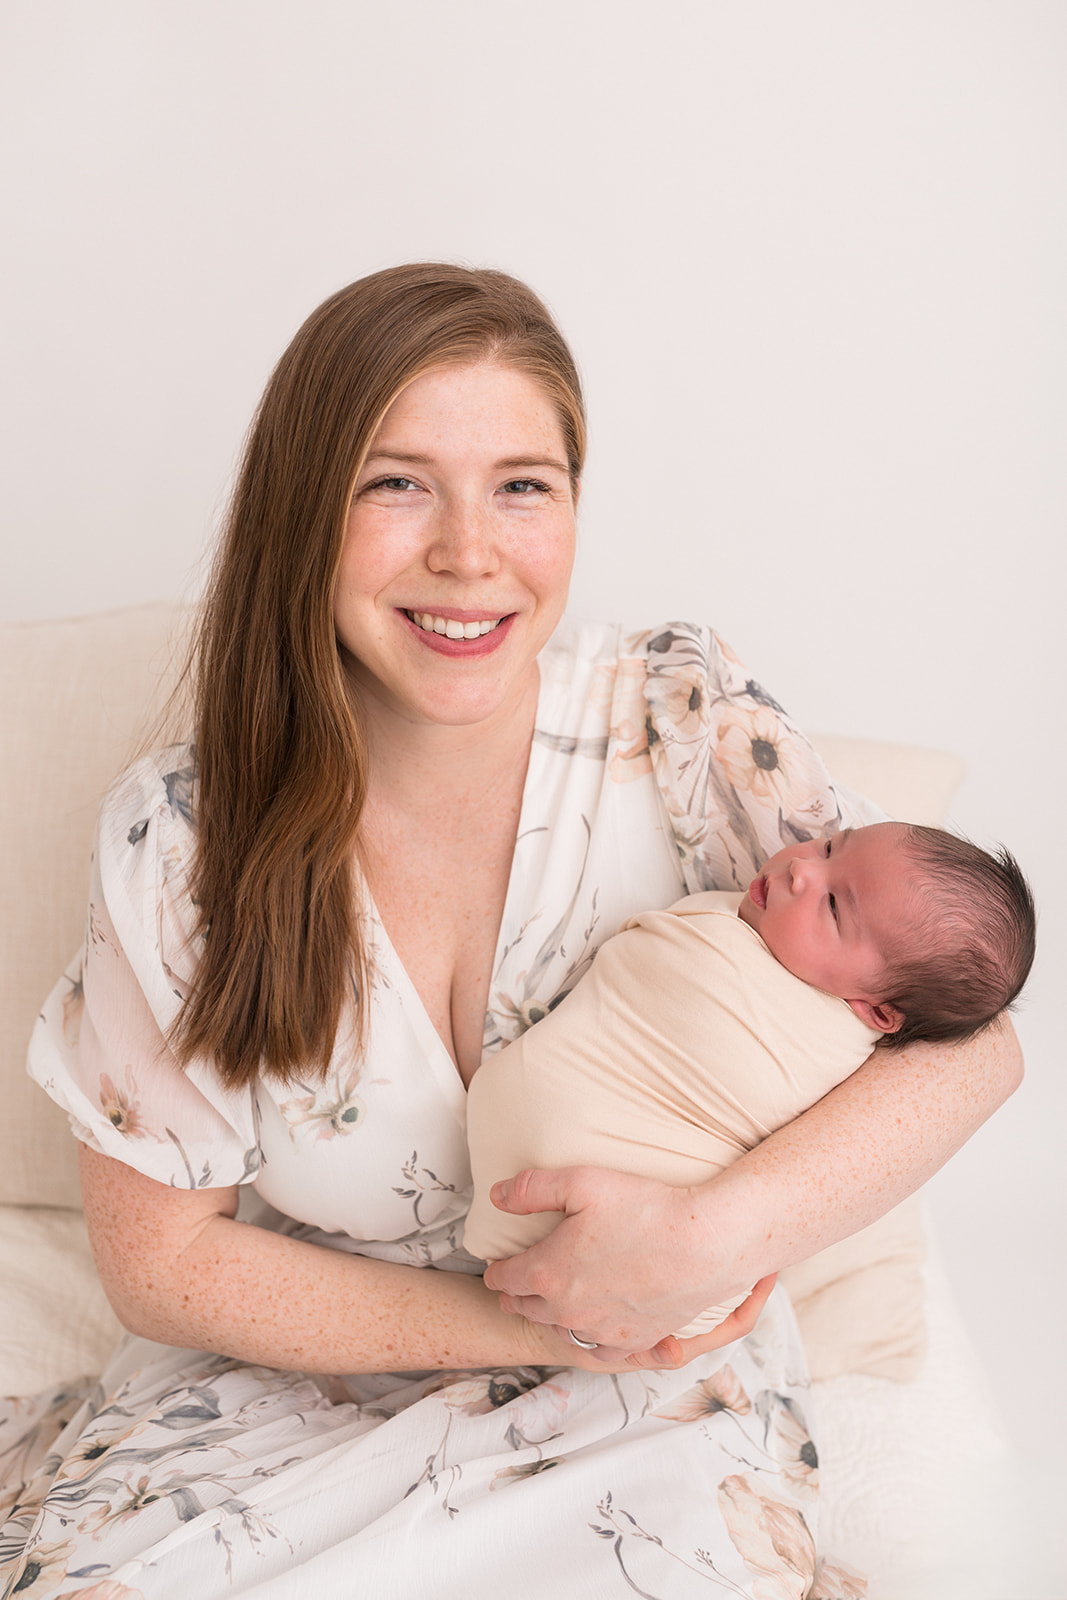 A mother in a floral dress sits on a bed smiling with her newborn baby in her arms